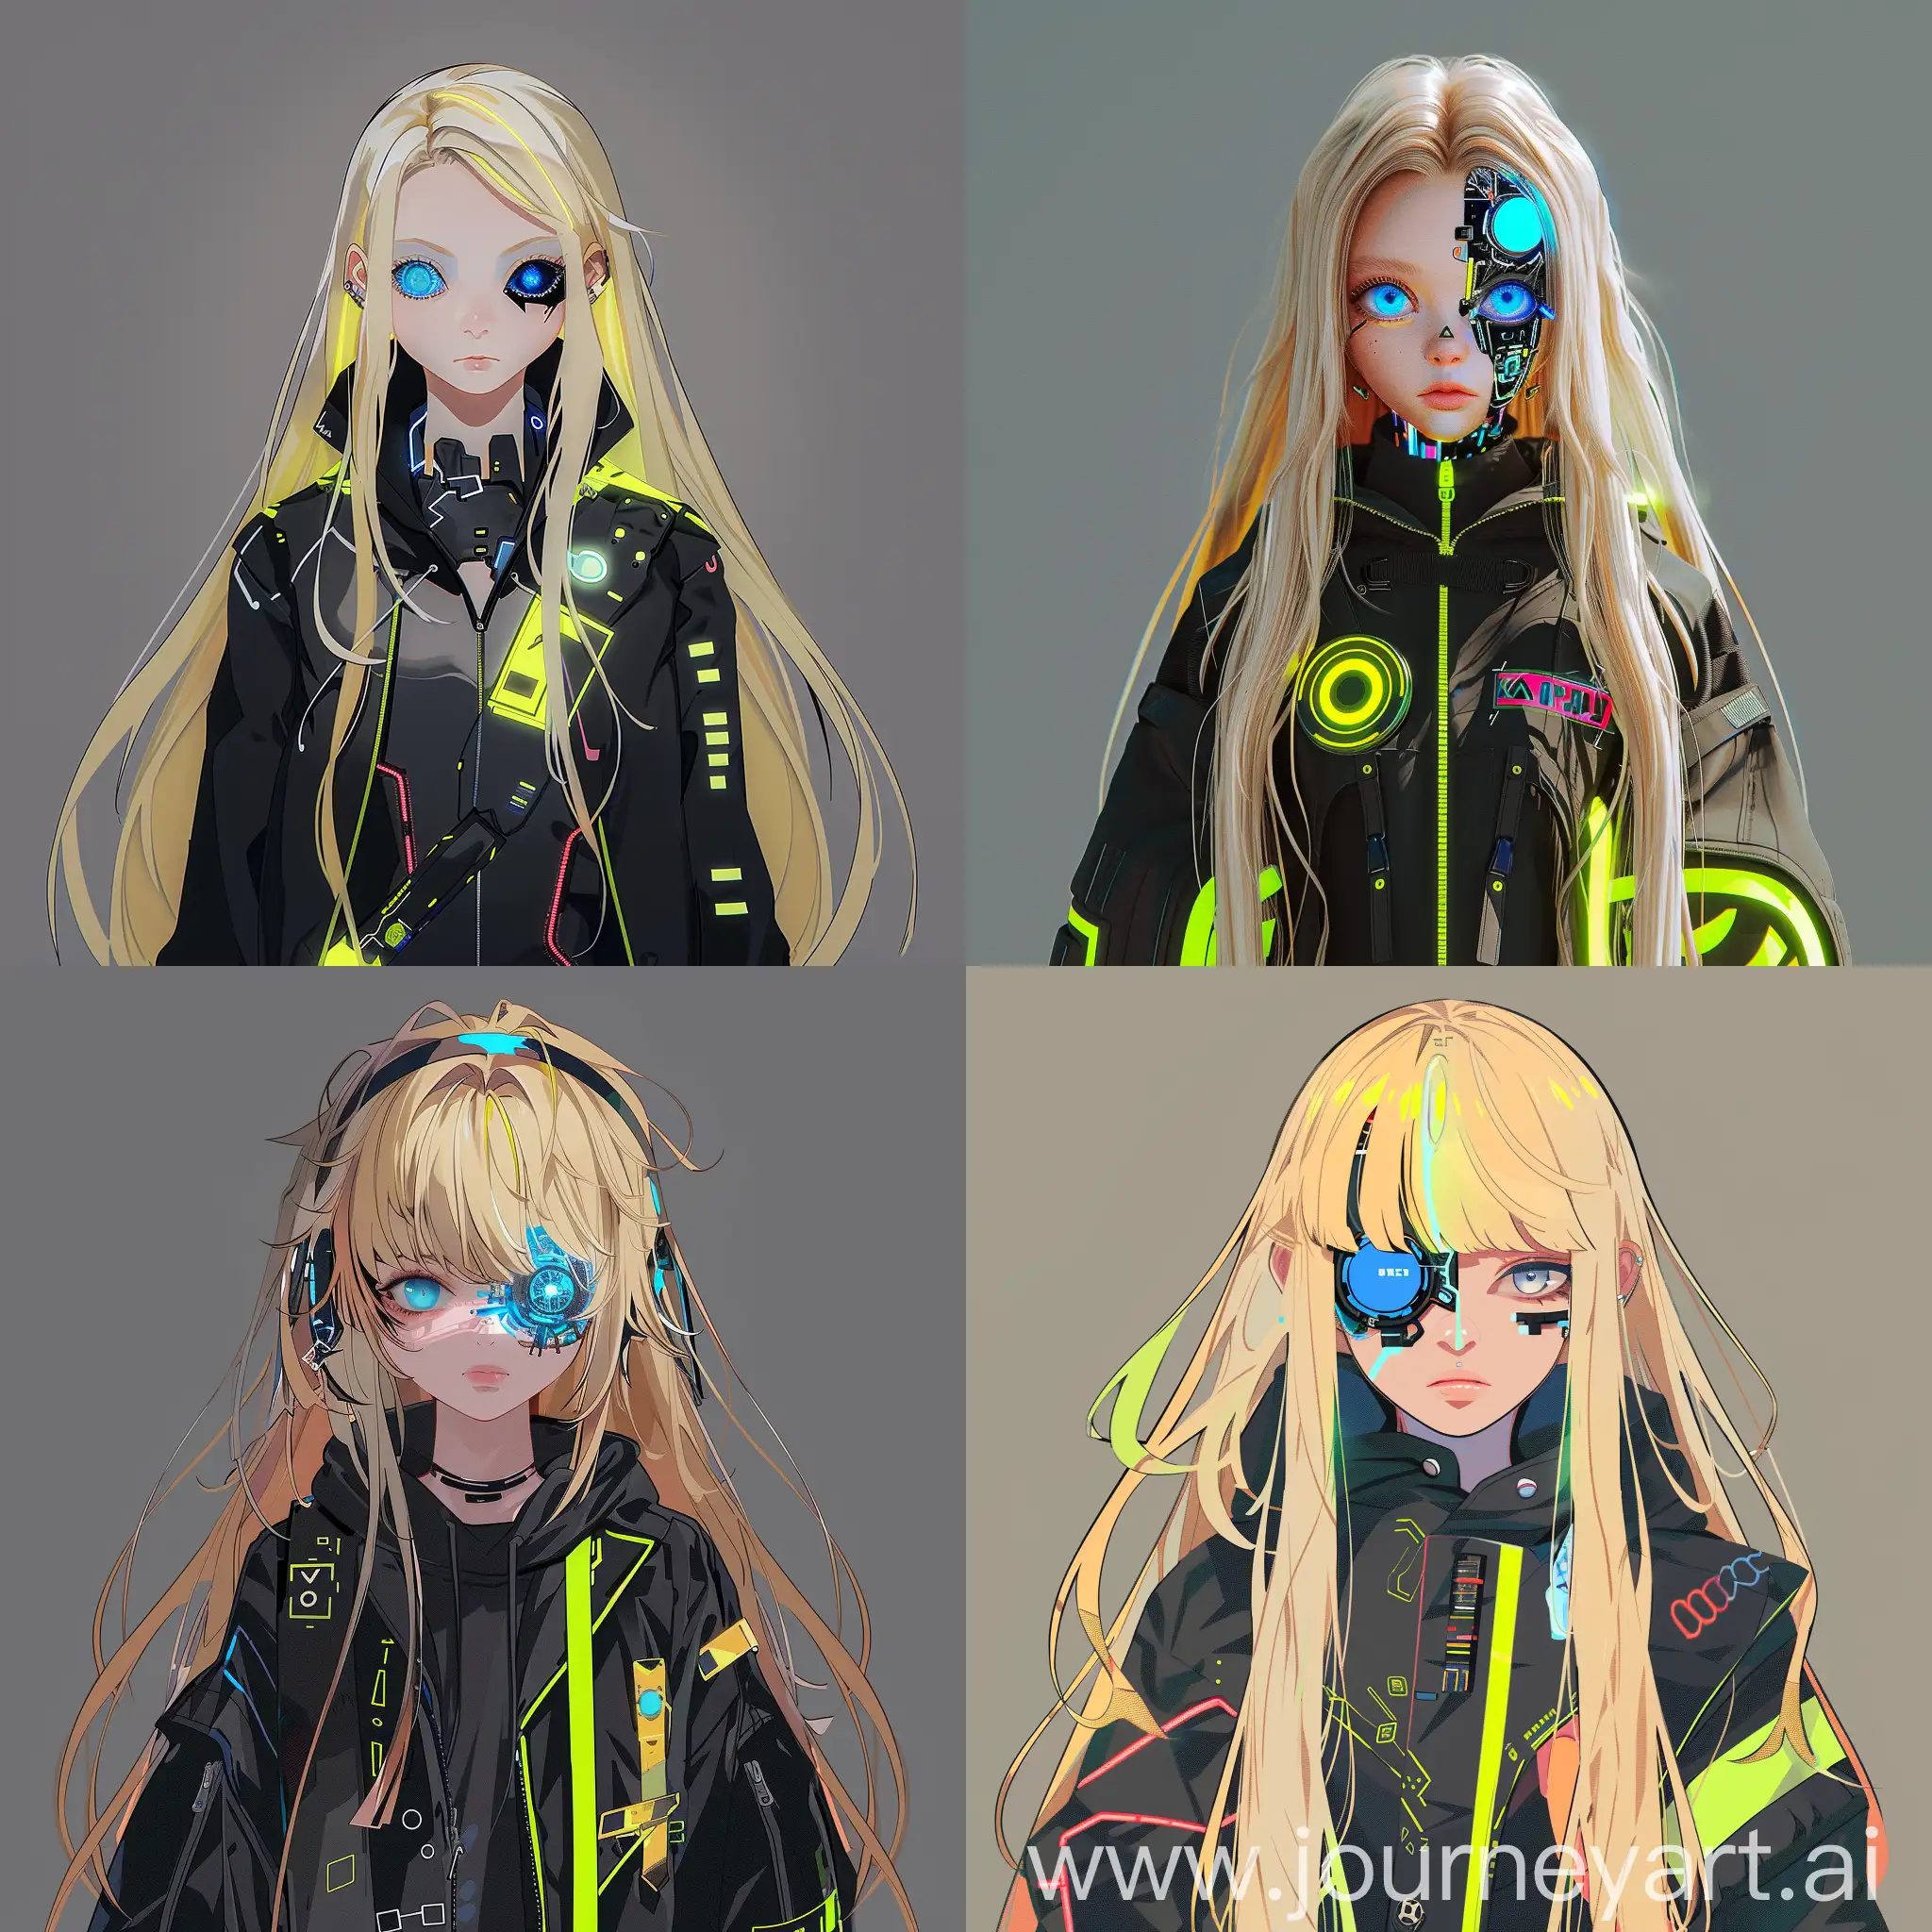 Futuristic-Teen-with-Cyber-Eye-in-Stylish-Black-and-Neon-Outfit